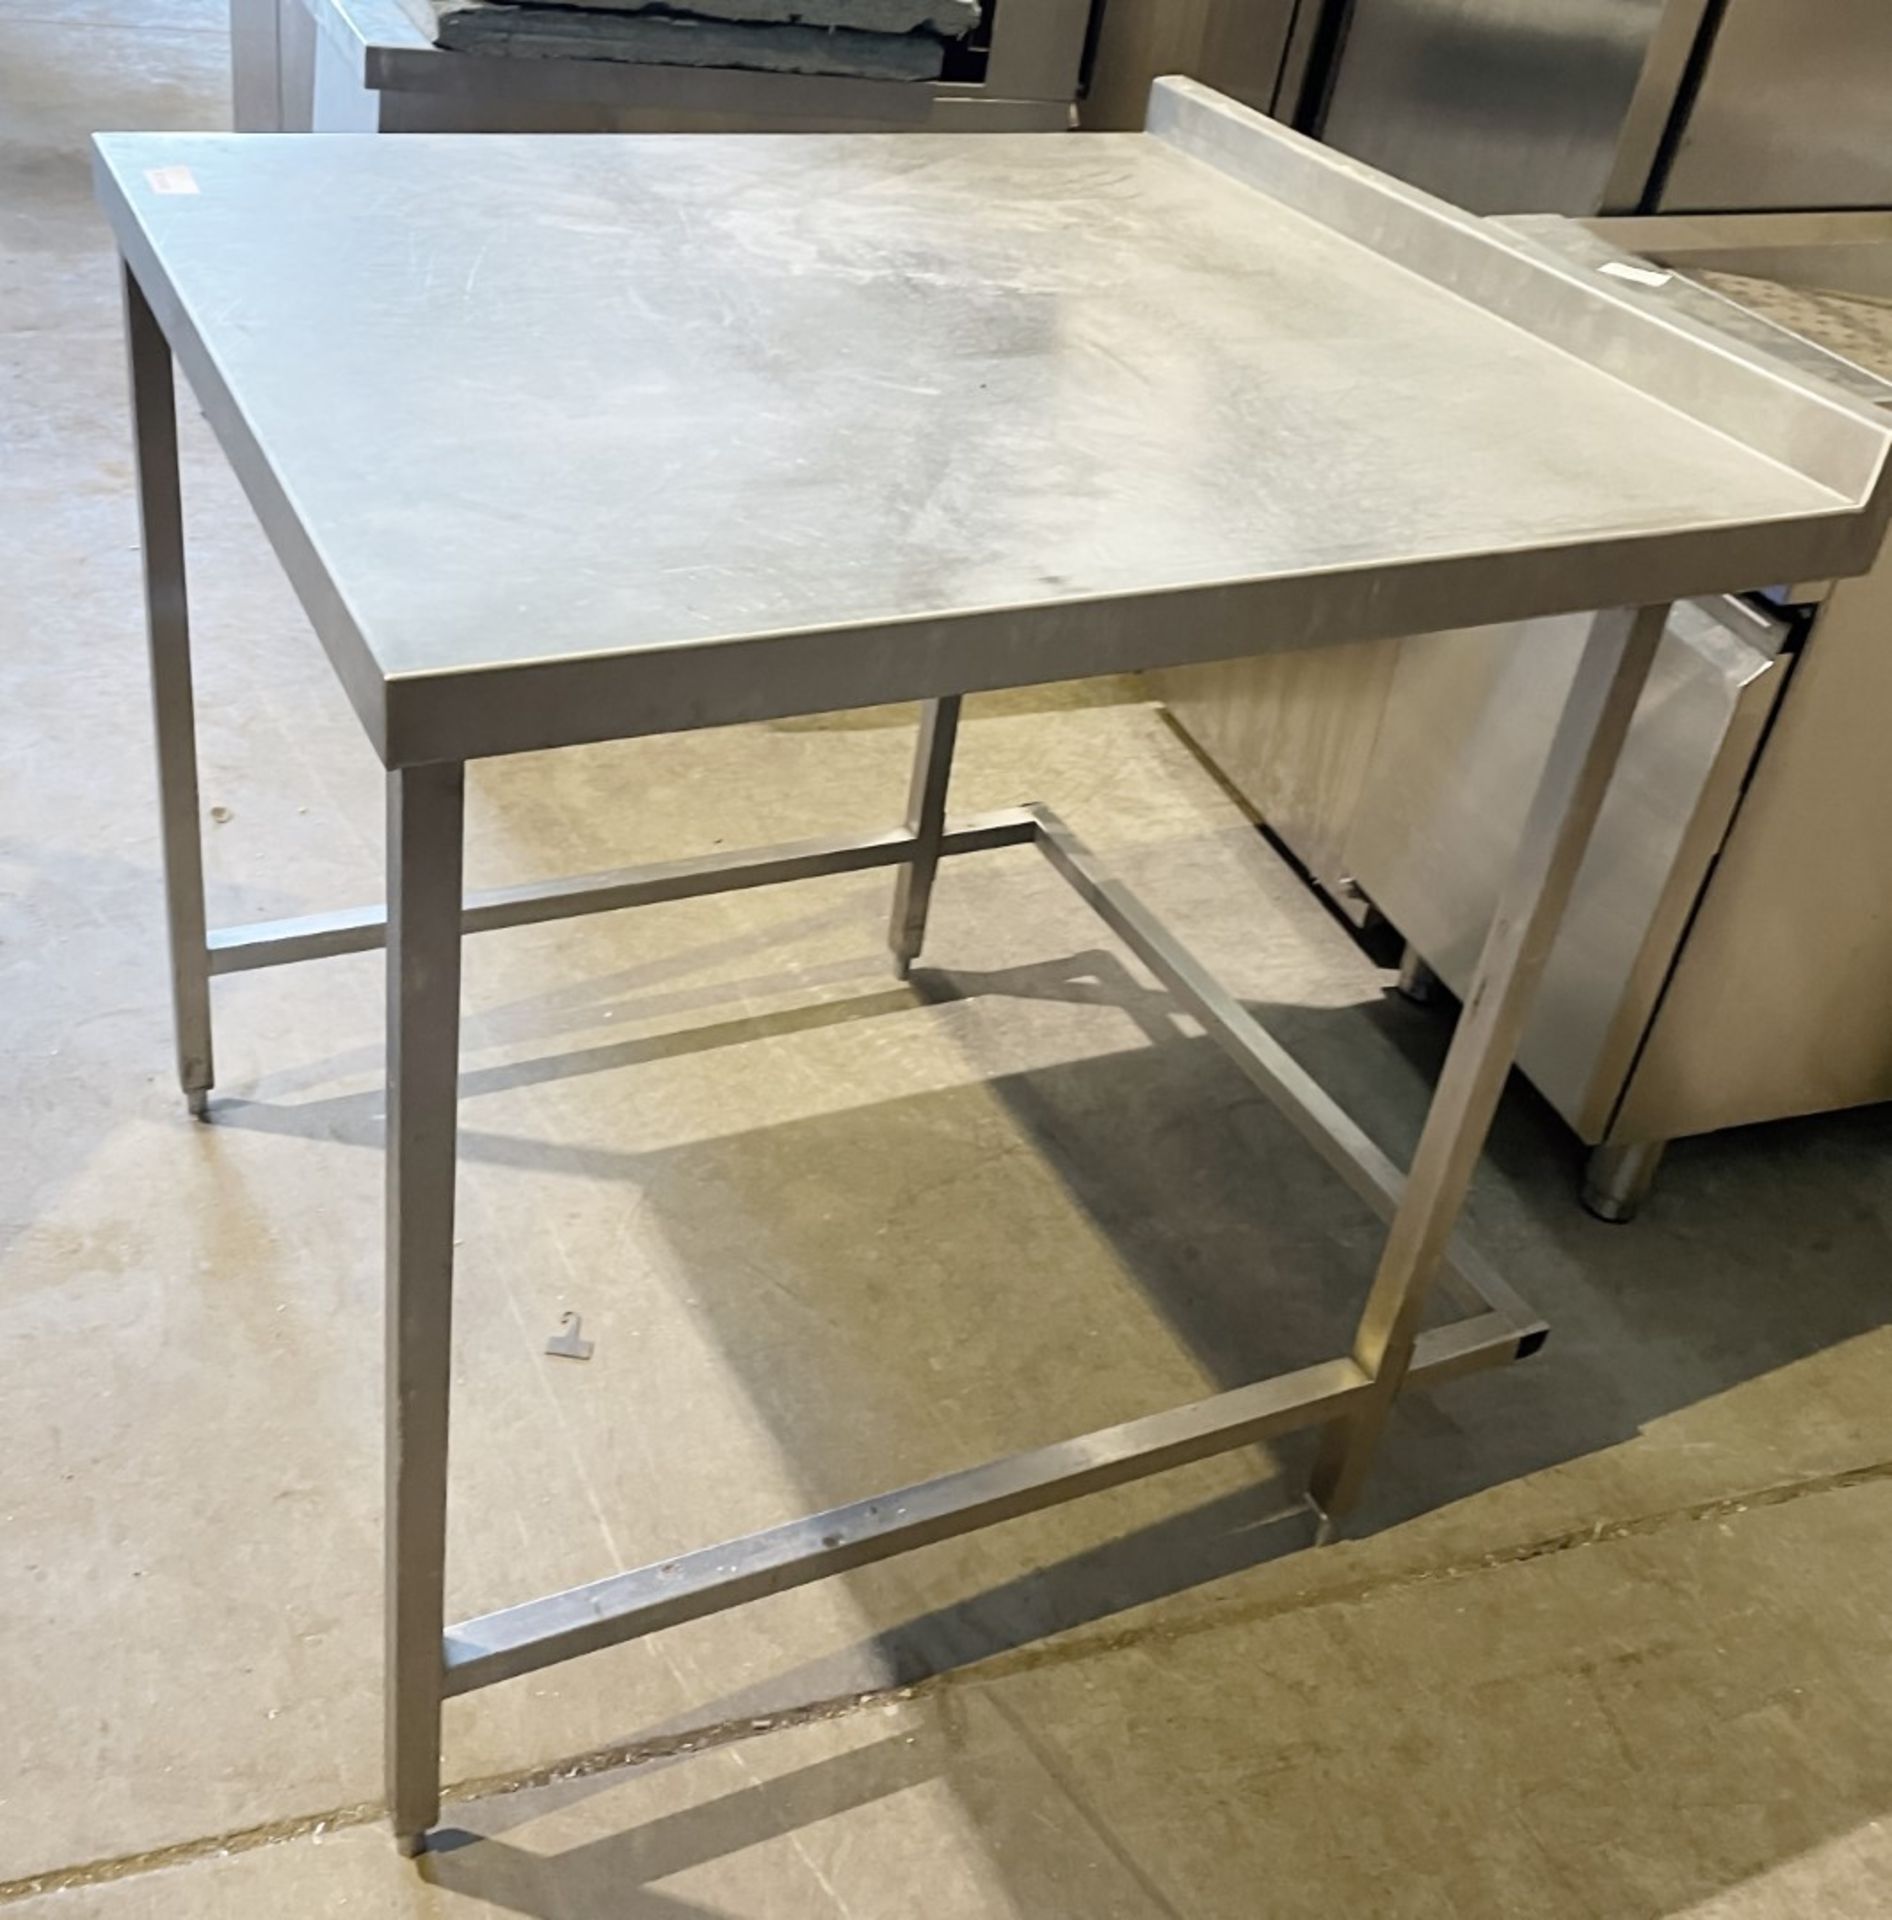 1 X Stainless Steel Prep Table - Approx 84X95X92Cm - Ref: FGN048 - CL834 - Location: Essex, RM19This - Image 2 of 4